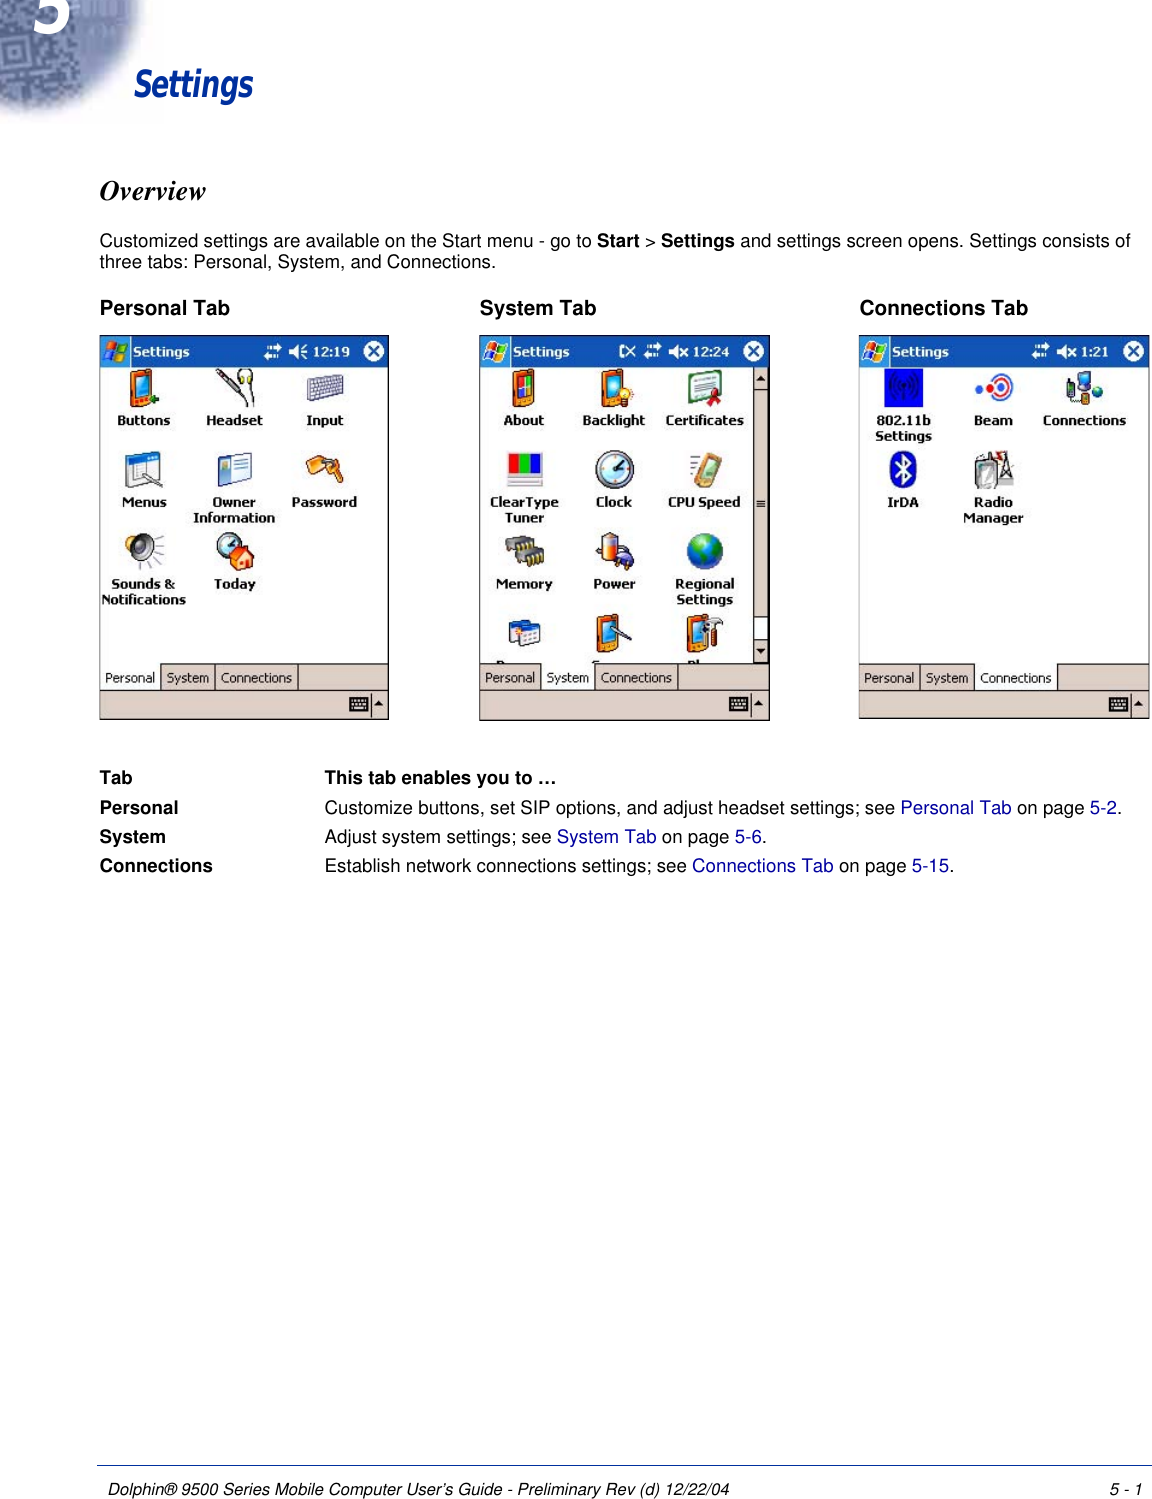 Dolphin® 9500 Series Mobile Computer User’s Guide - Preliminary Rev (d) 12/22/04 5 - 15                                       SettingsOverviewCustomized settings are available on the Start menu - go to Start &gt; Settings and settings screen opens. Settings consists of three tabs: Personal, System, and Connections.     Tab This tab enables you to …   Personal  Customize buttons, set SIP options, and adjust headset settings; see Personal Tab on page 5-2.System  Adjust system settings; see System Tab on page 5-6.Connections  Establish network connections settings; see Connections Tab on page 5-15.Personal Tab System Tab Connections Tab